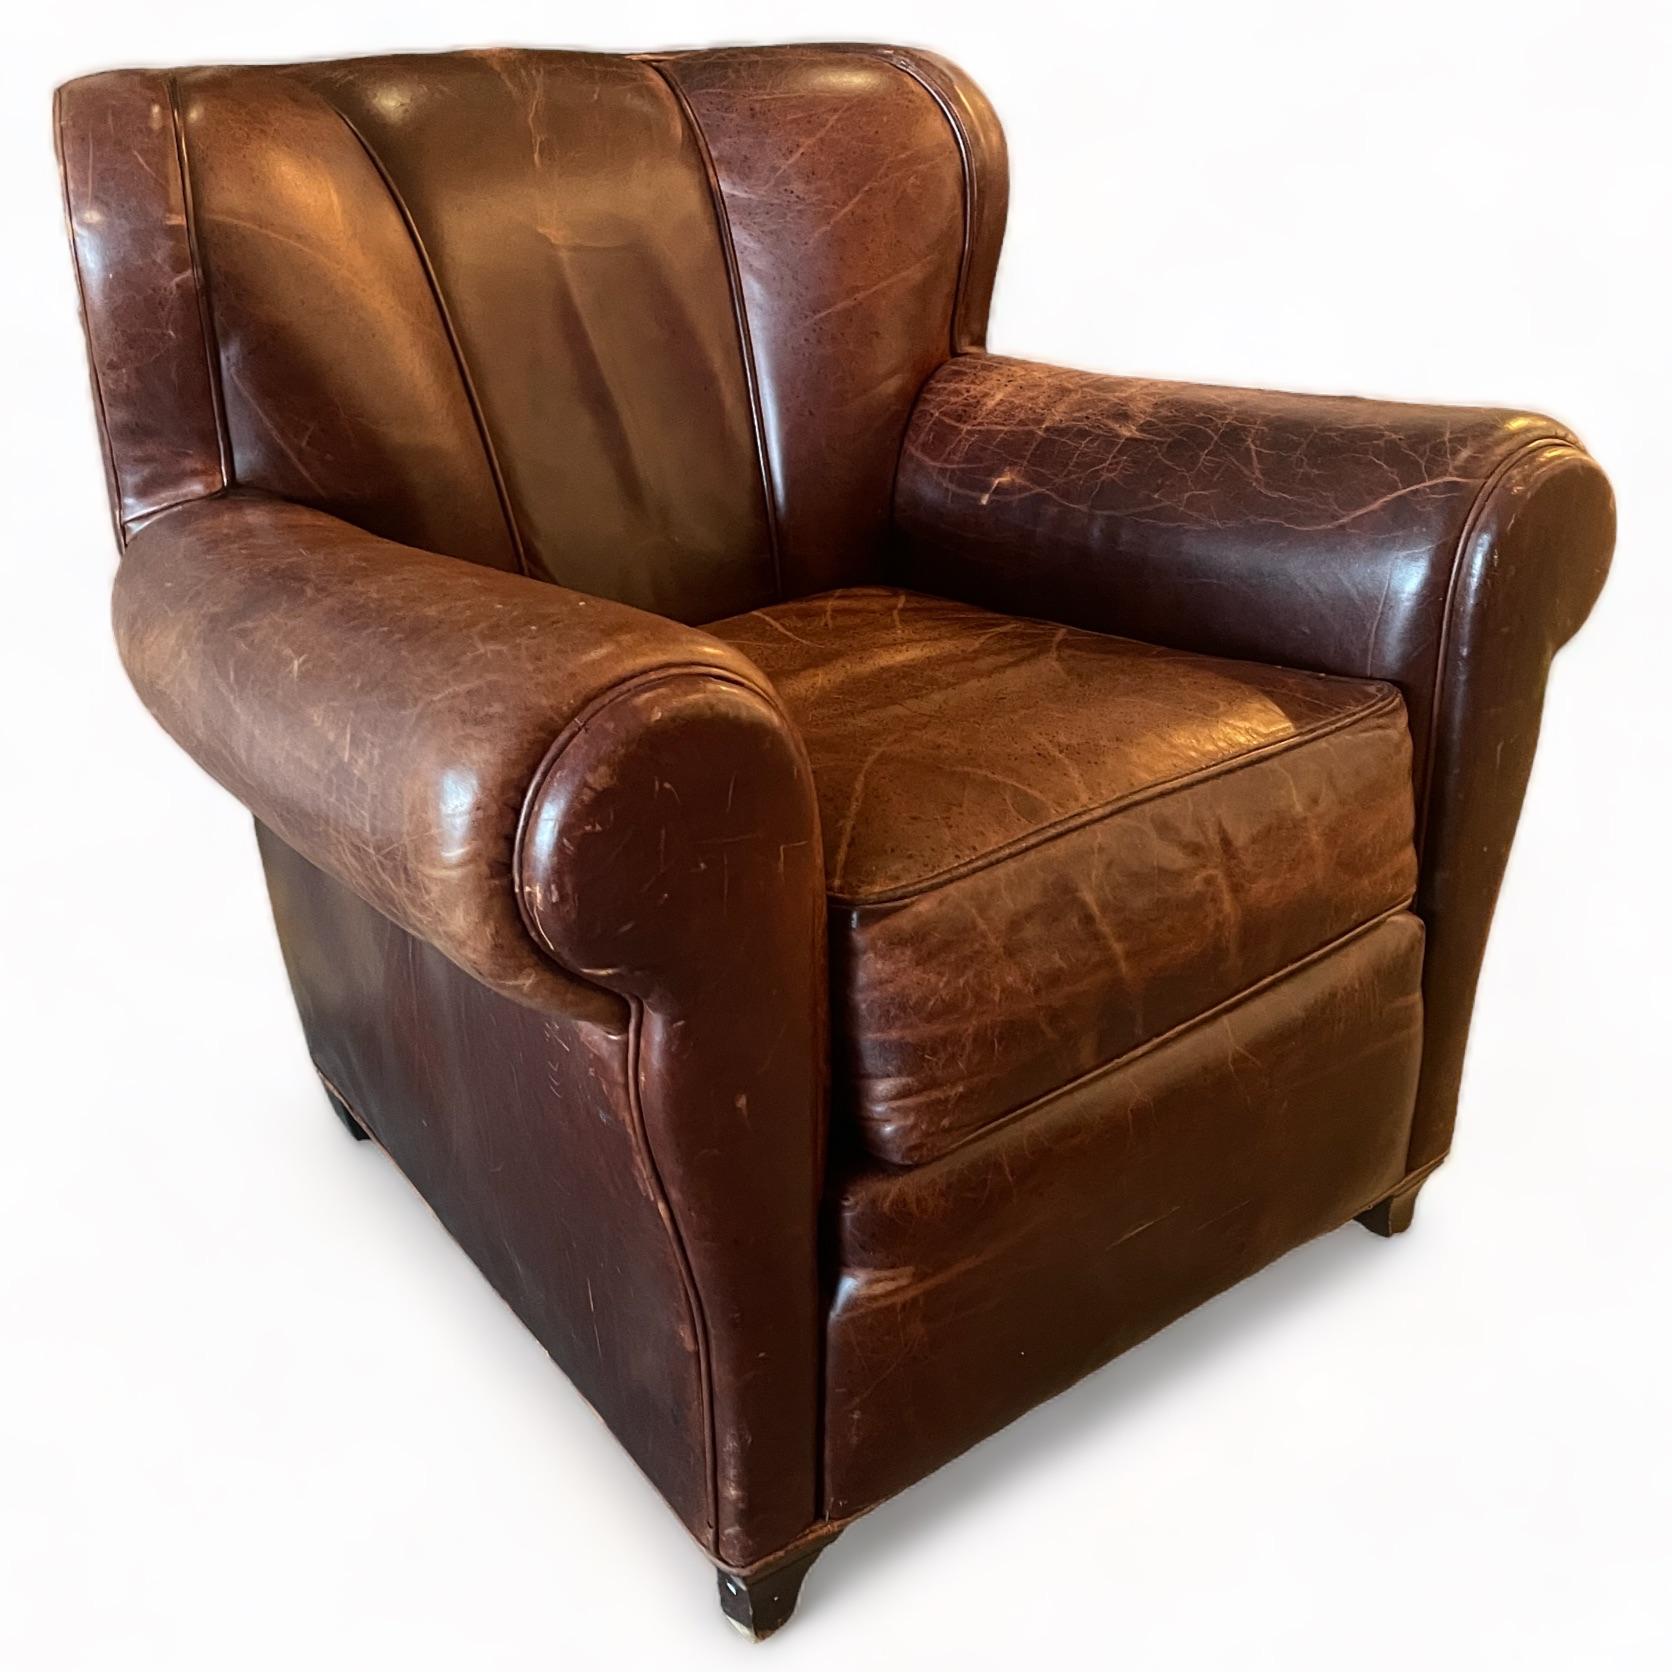 Our incredible leather chairs have been thoughtfully selected for their craftsmanship and unique character that will compliment any space. With vintage items there may be some minor imperfections adding to its charm.